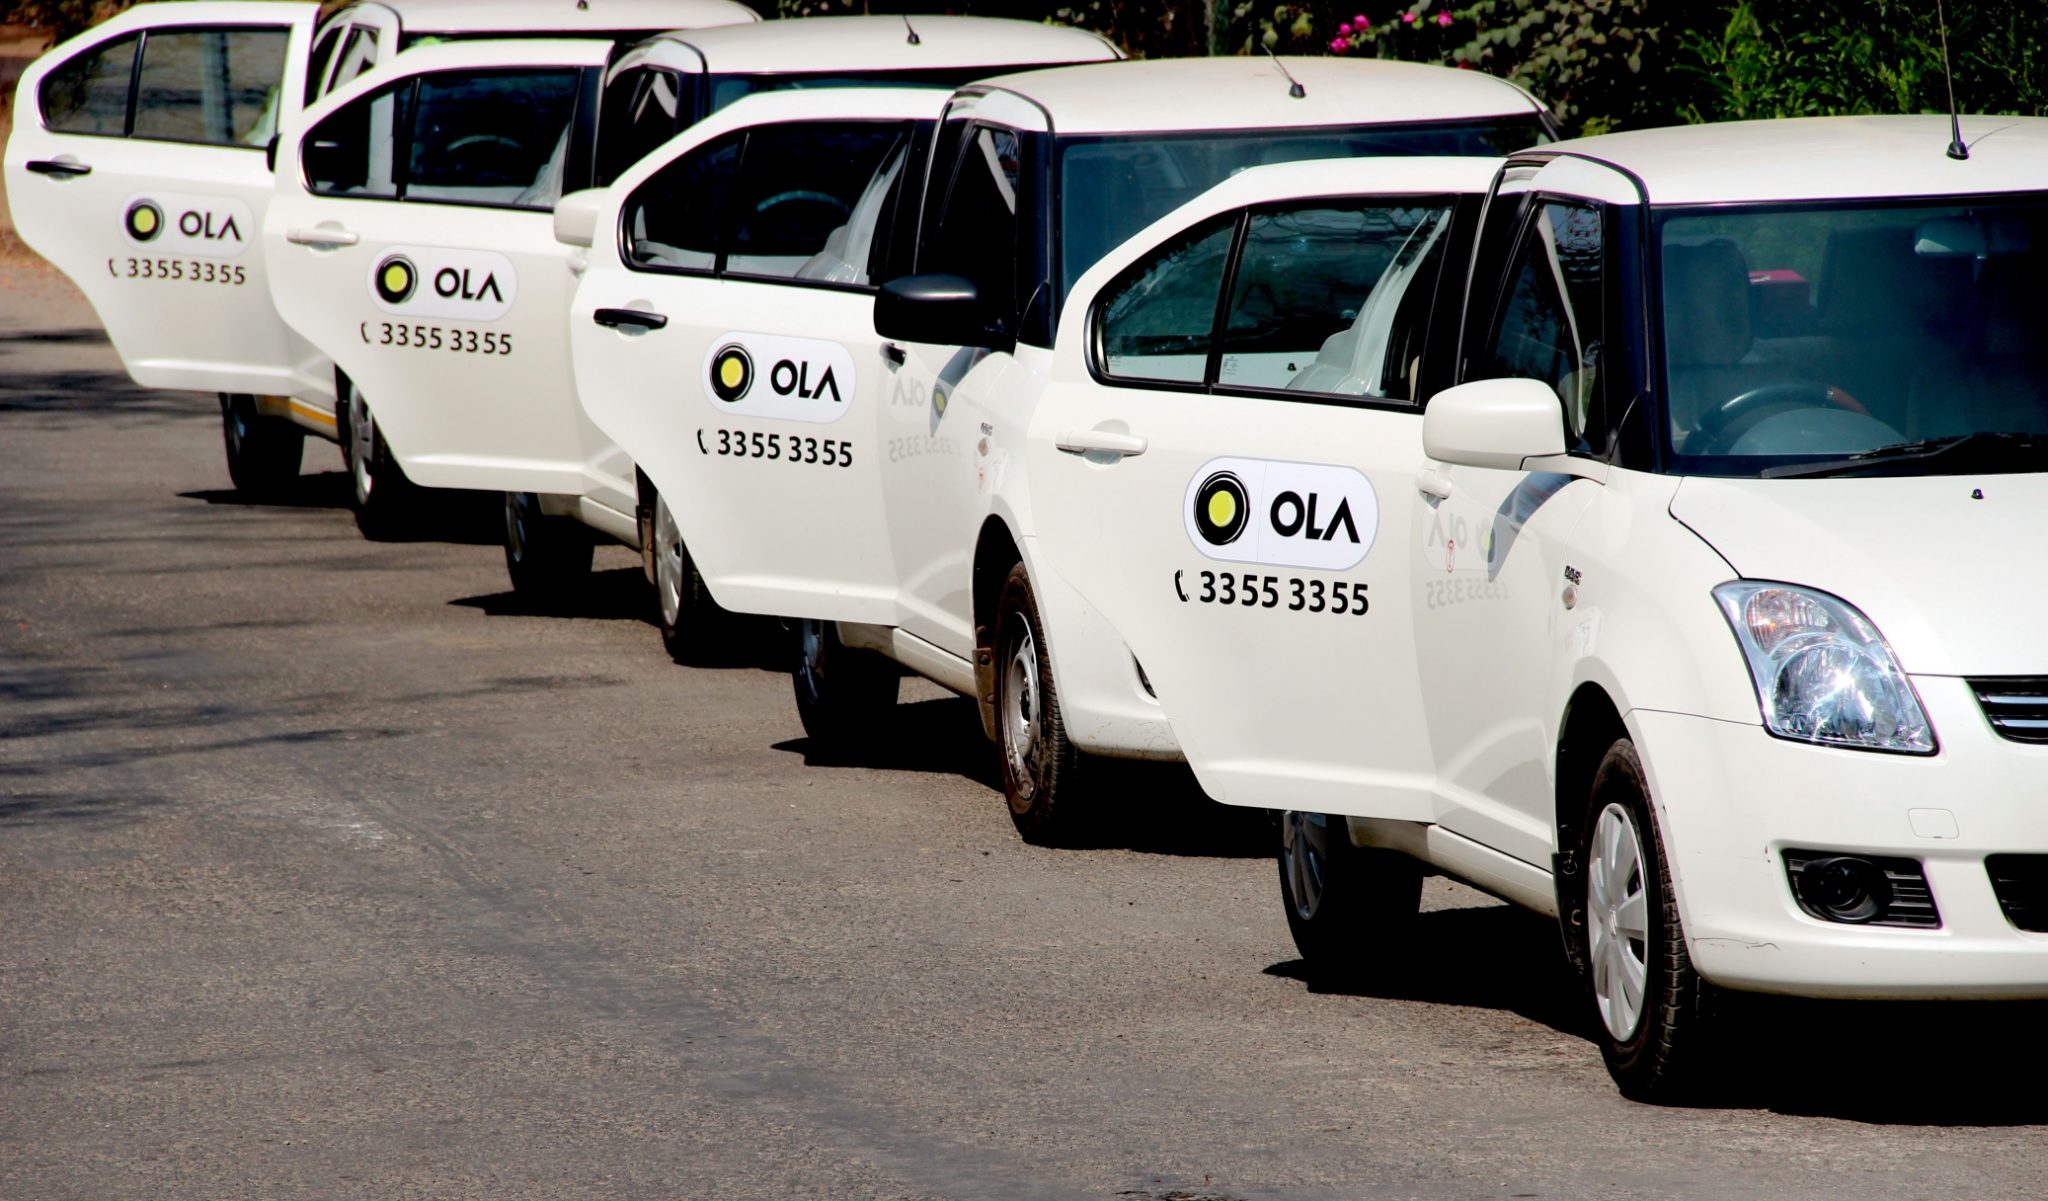 Ola has partnerships with Mahindra and Maruti. It is also in talks Toyota for electric cars